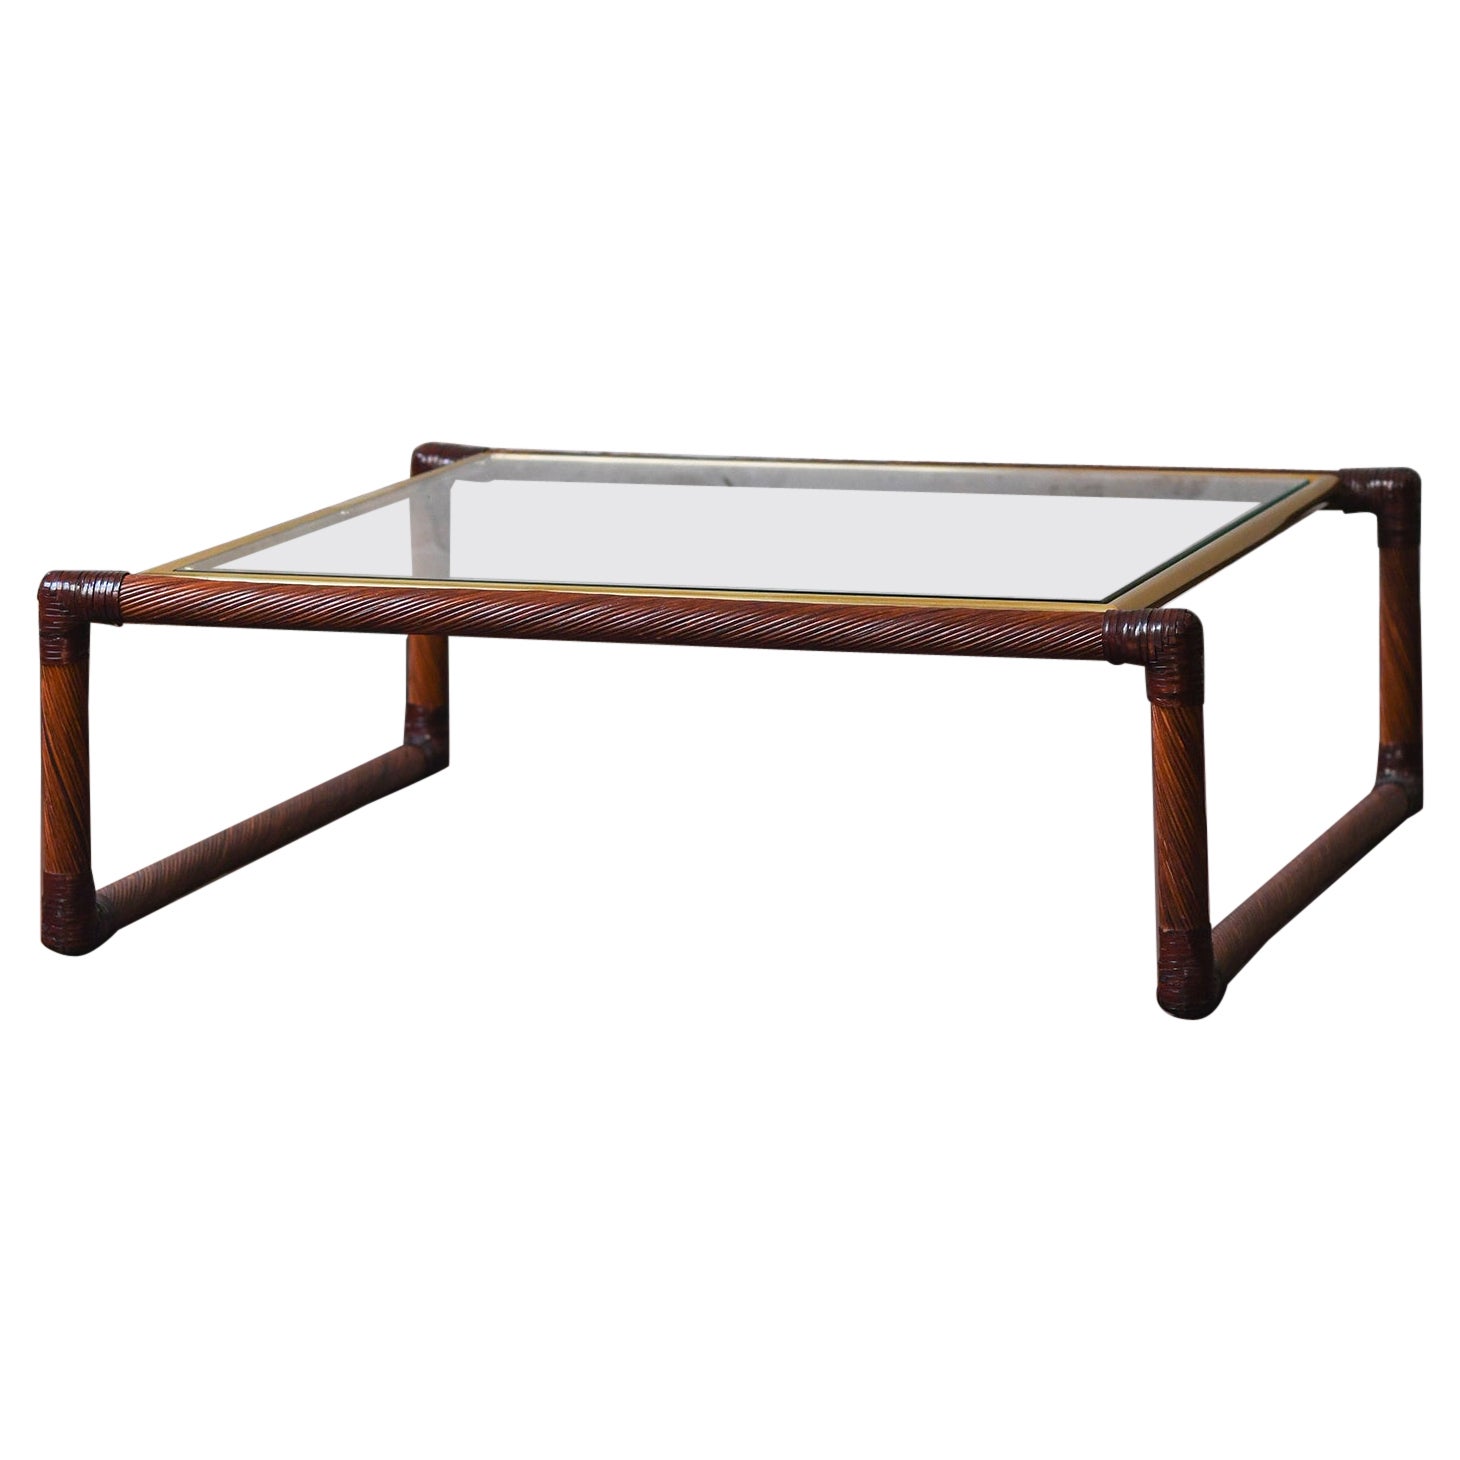 Rattan coffee table with leather bindings, brass details and glass top, 1970s